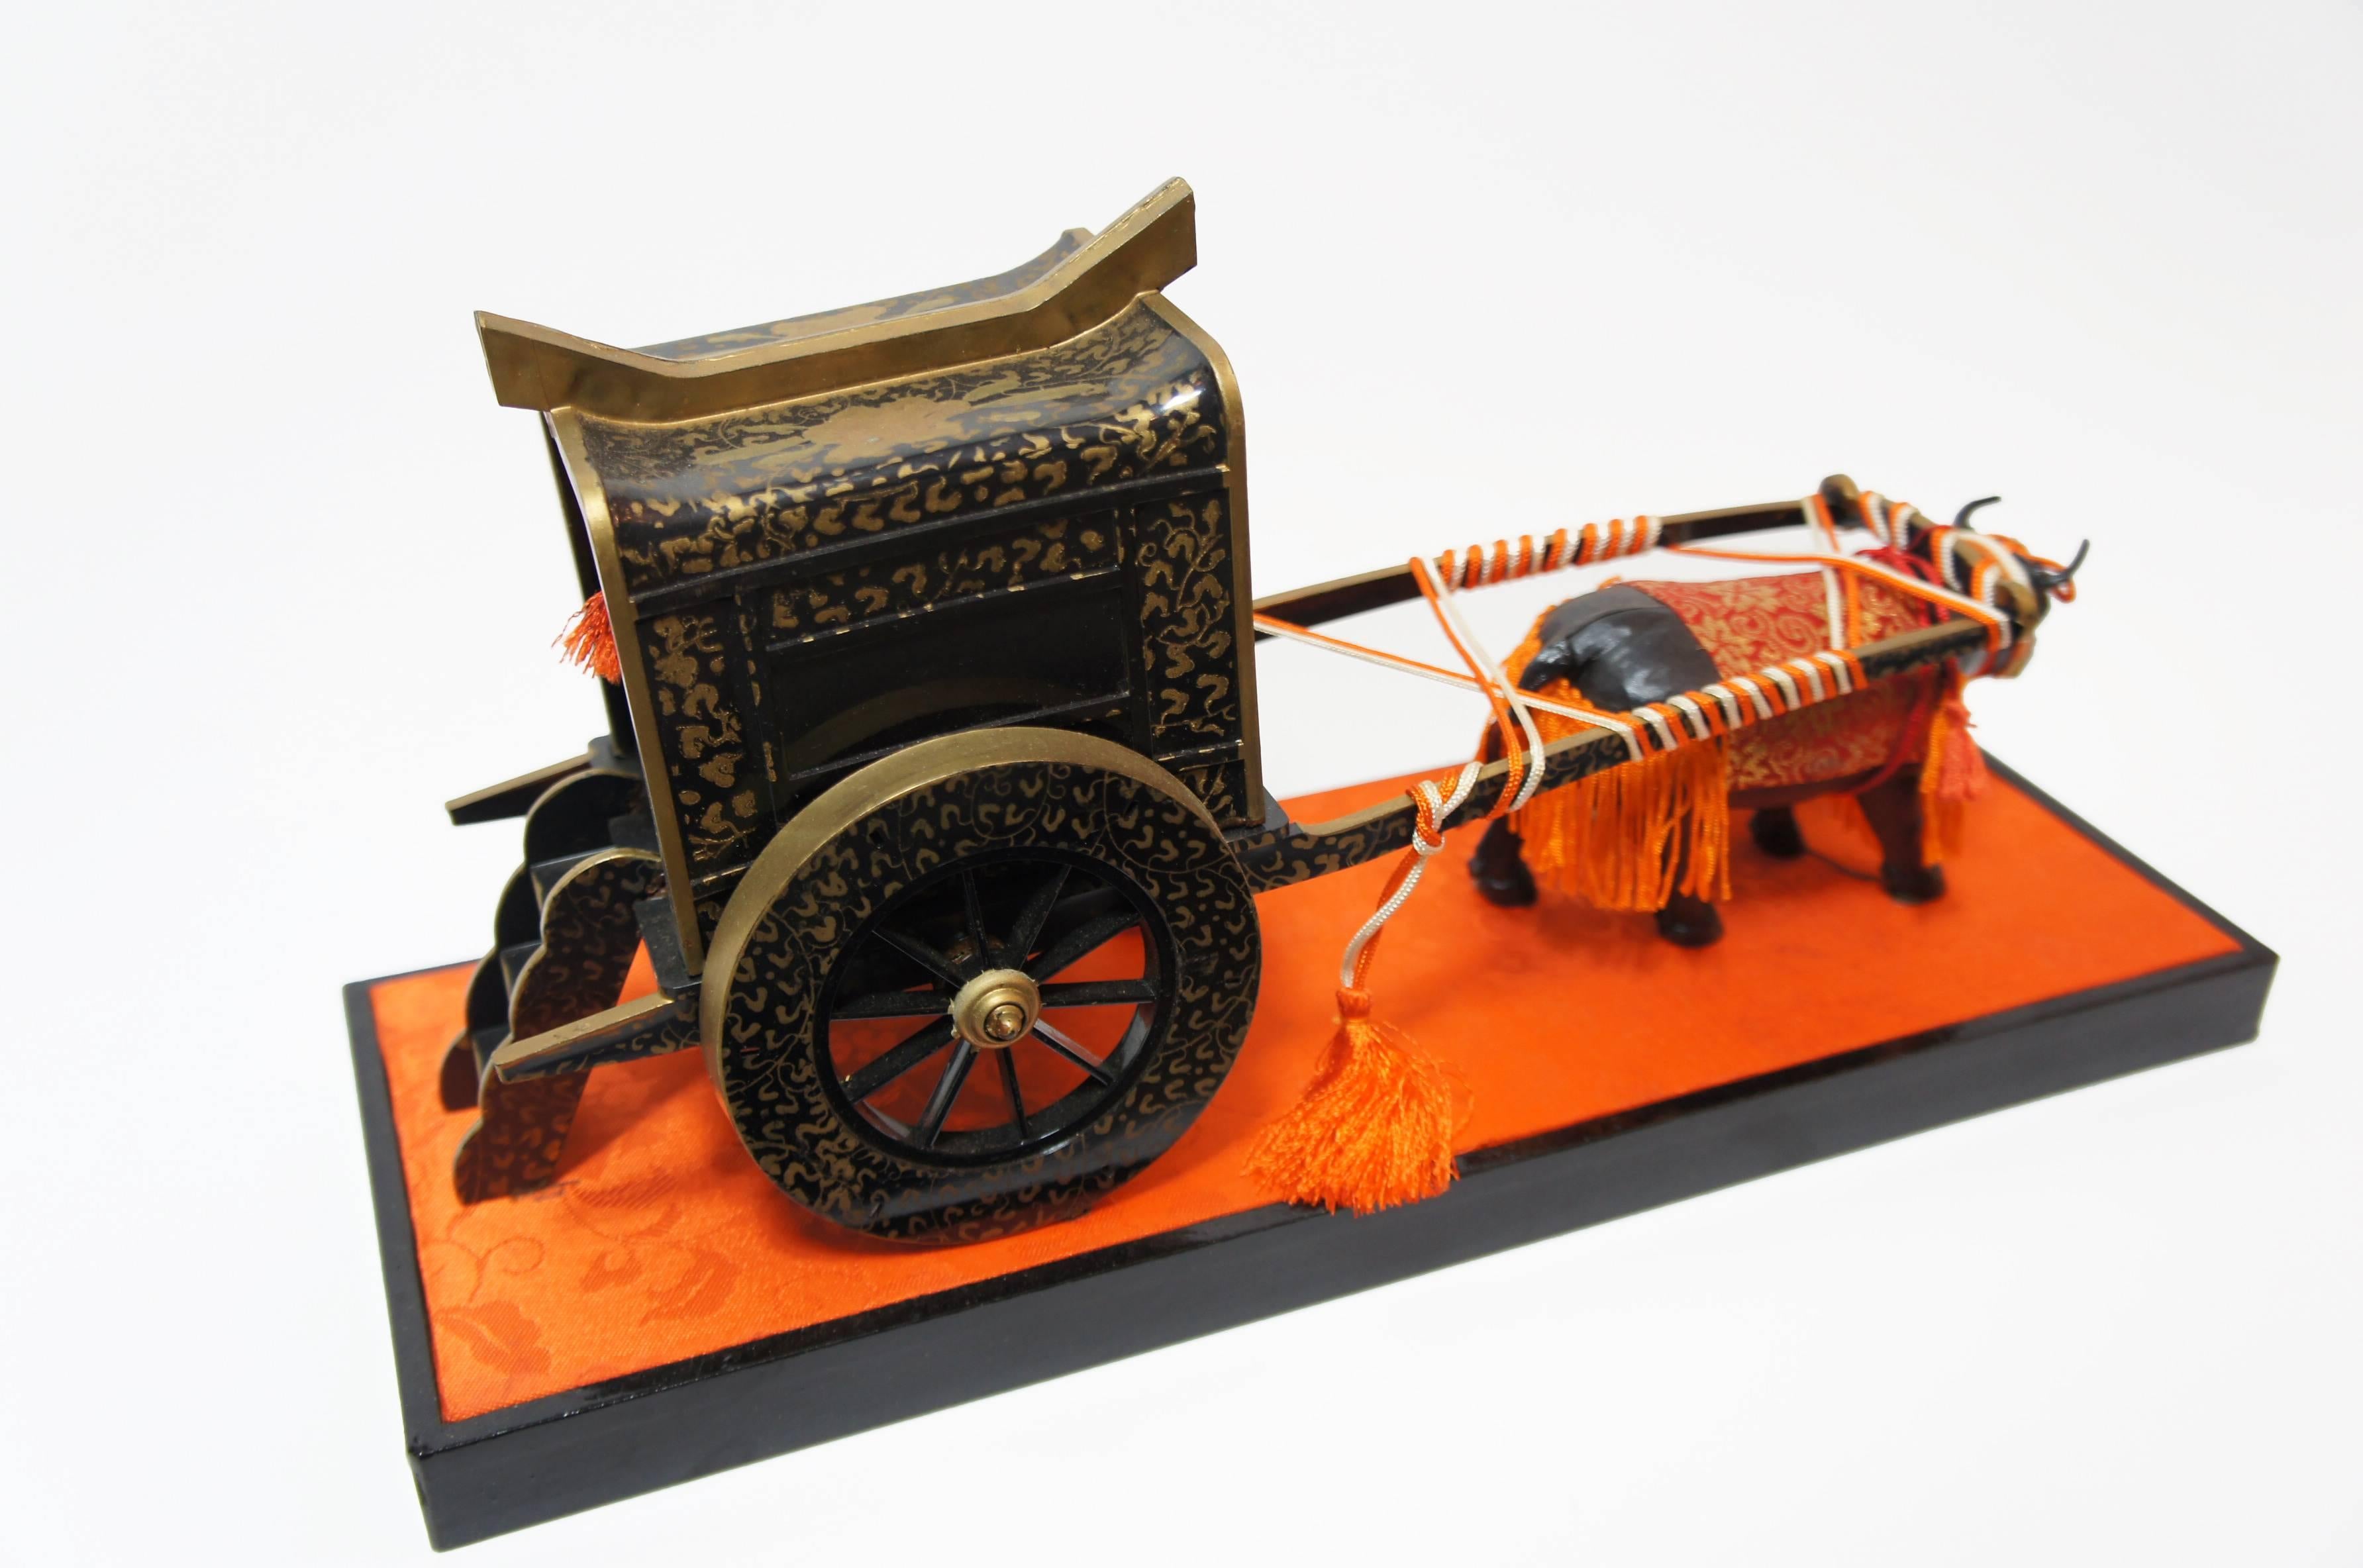 Hand-Crafted Japanese Decorative Ox Carriage Objects for Doll's Festival Hinamatsuri, 1950s